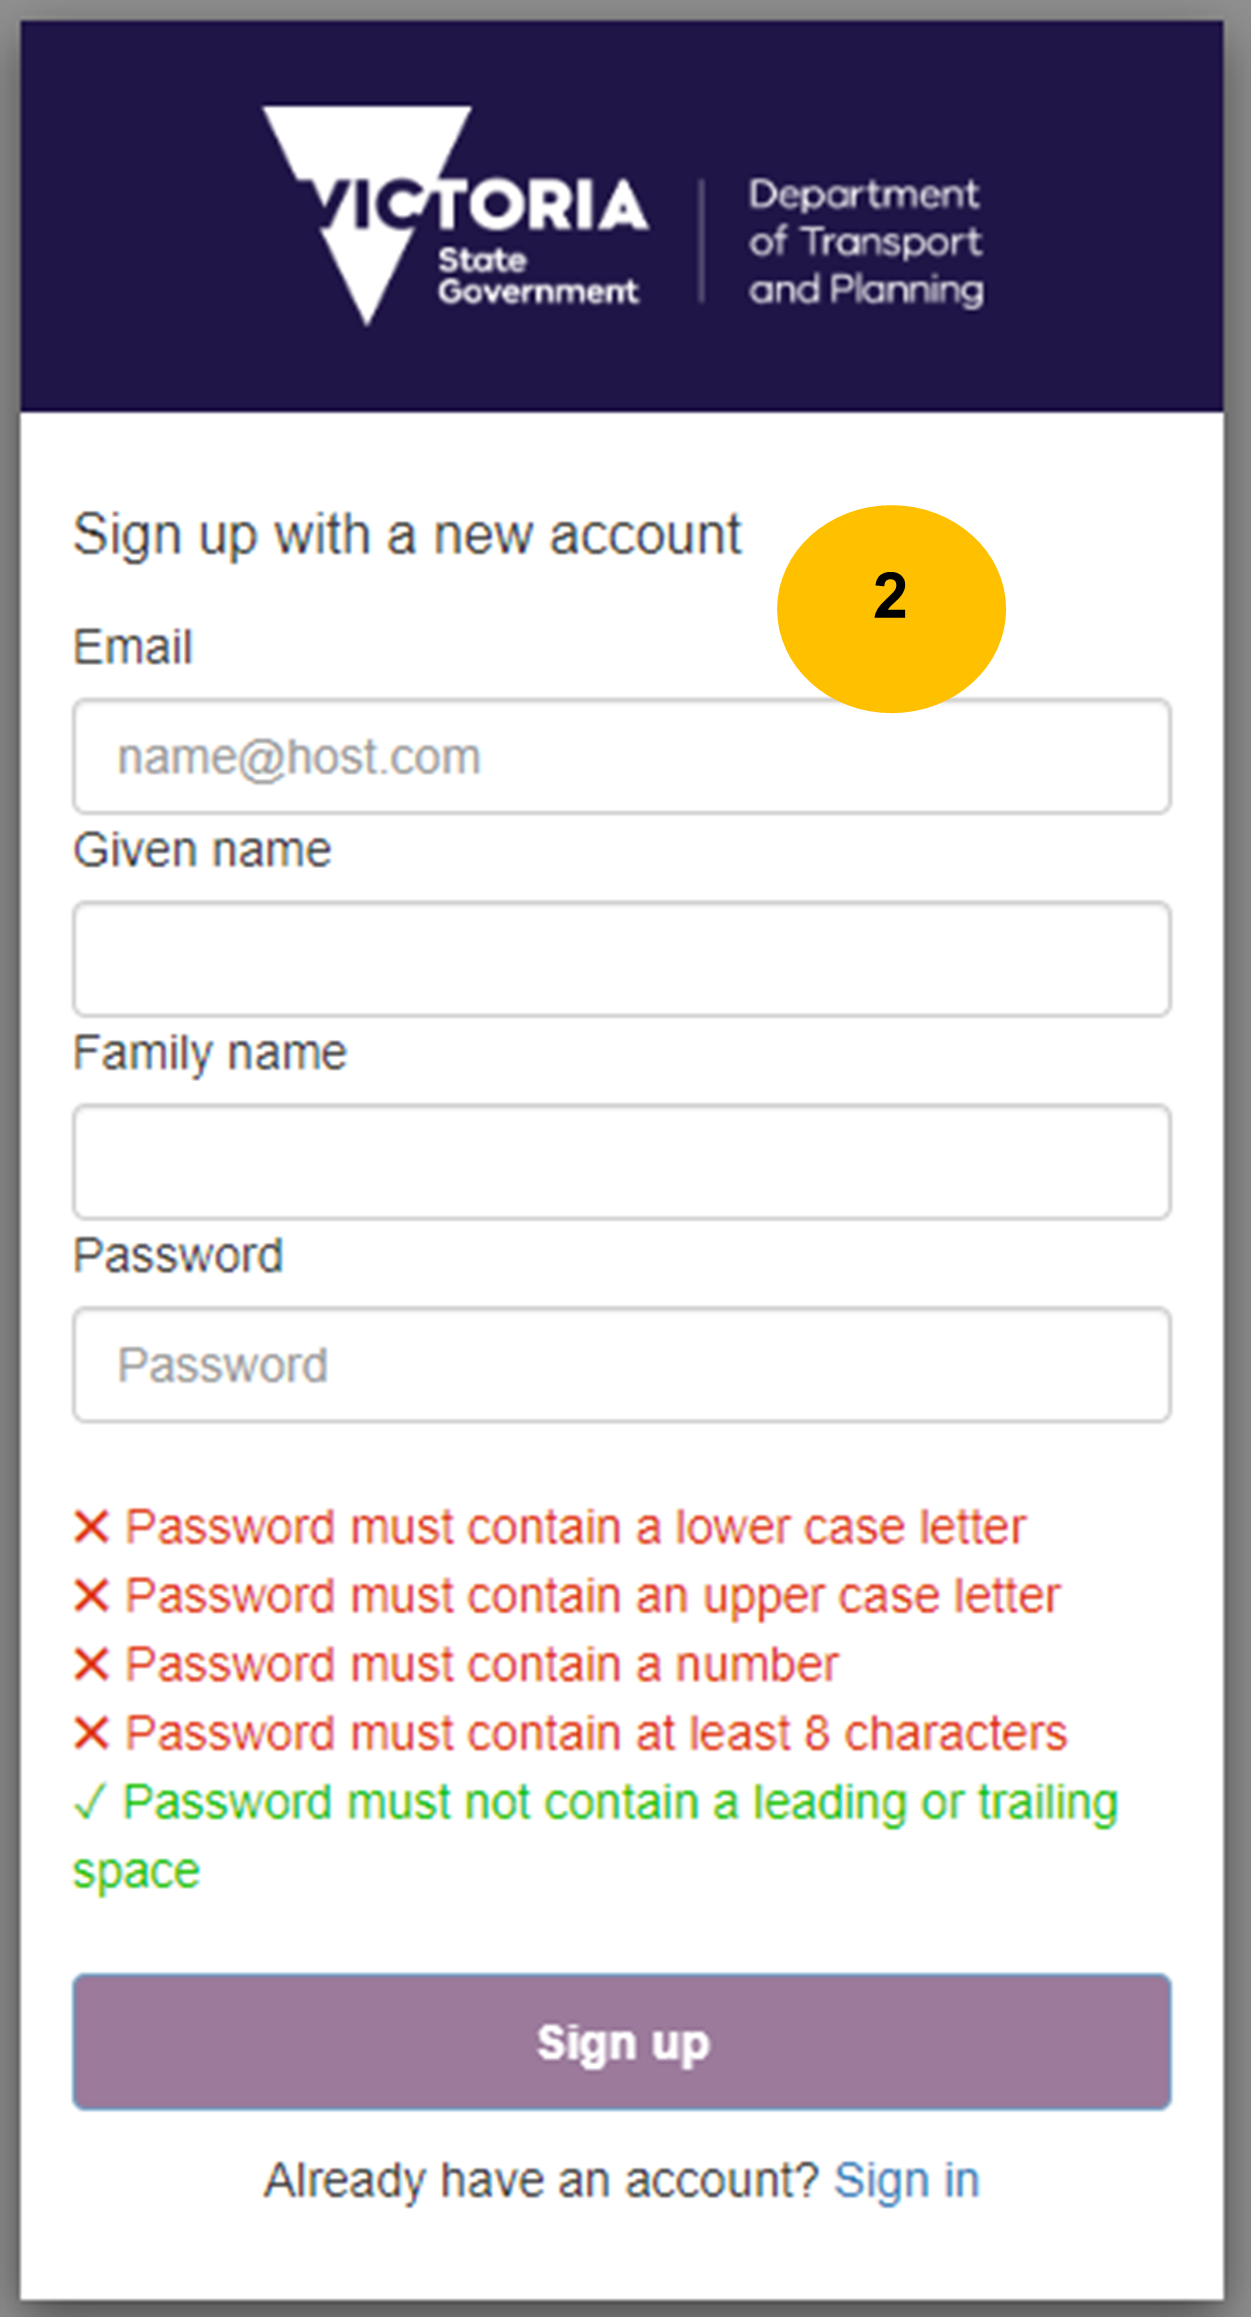 Step 2 showing the fields needed for sign up and password rules